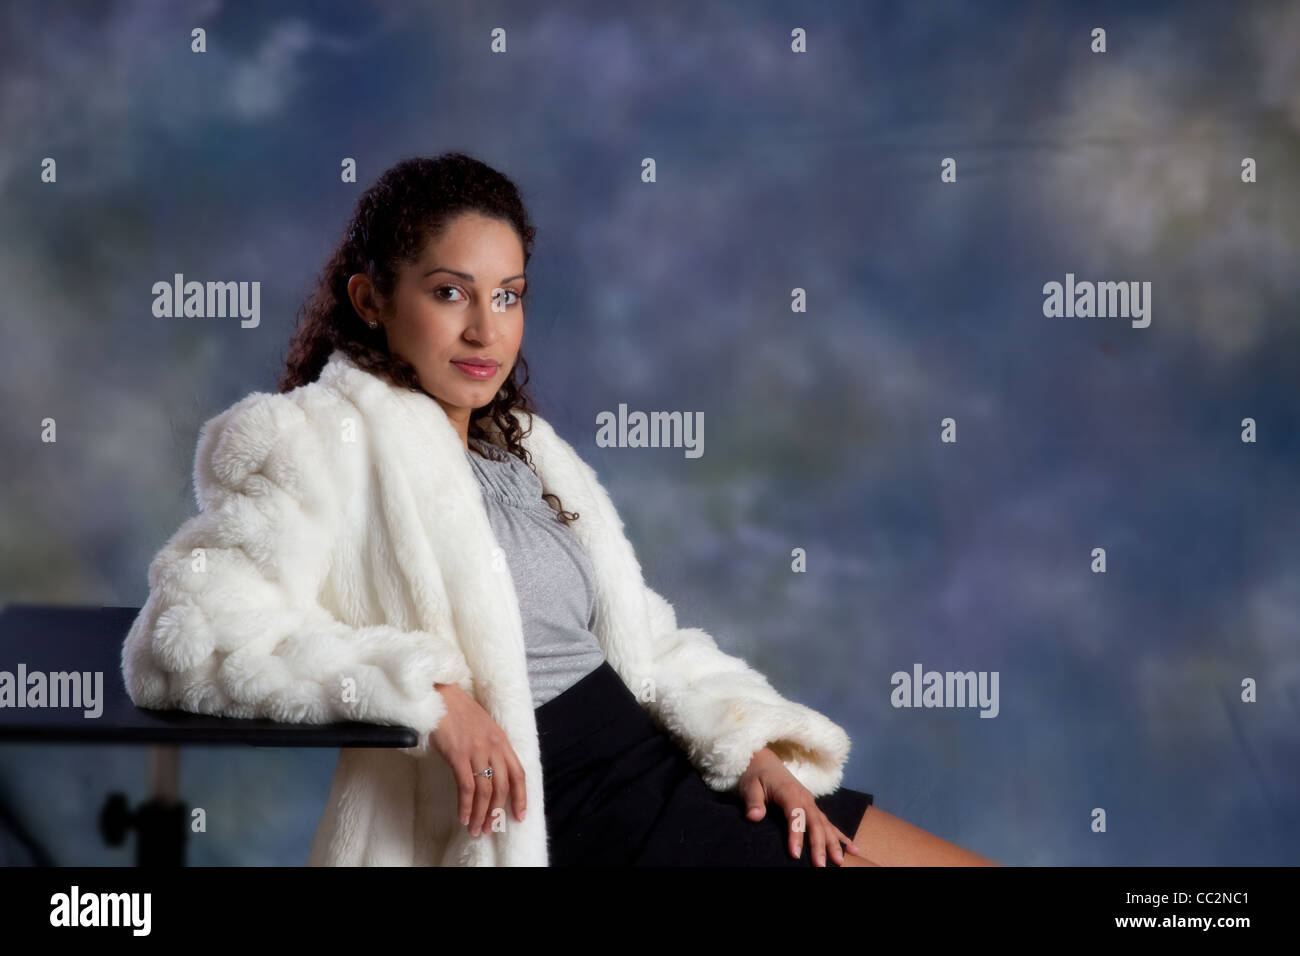 Happy and friendly woman in a white fur coat, sitting with eye contact and a slight smile for the camera Stock Photo